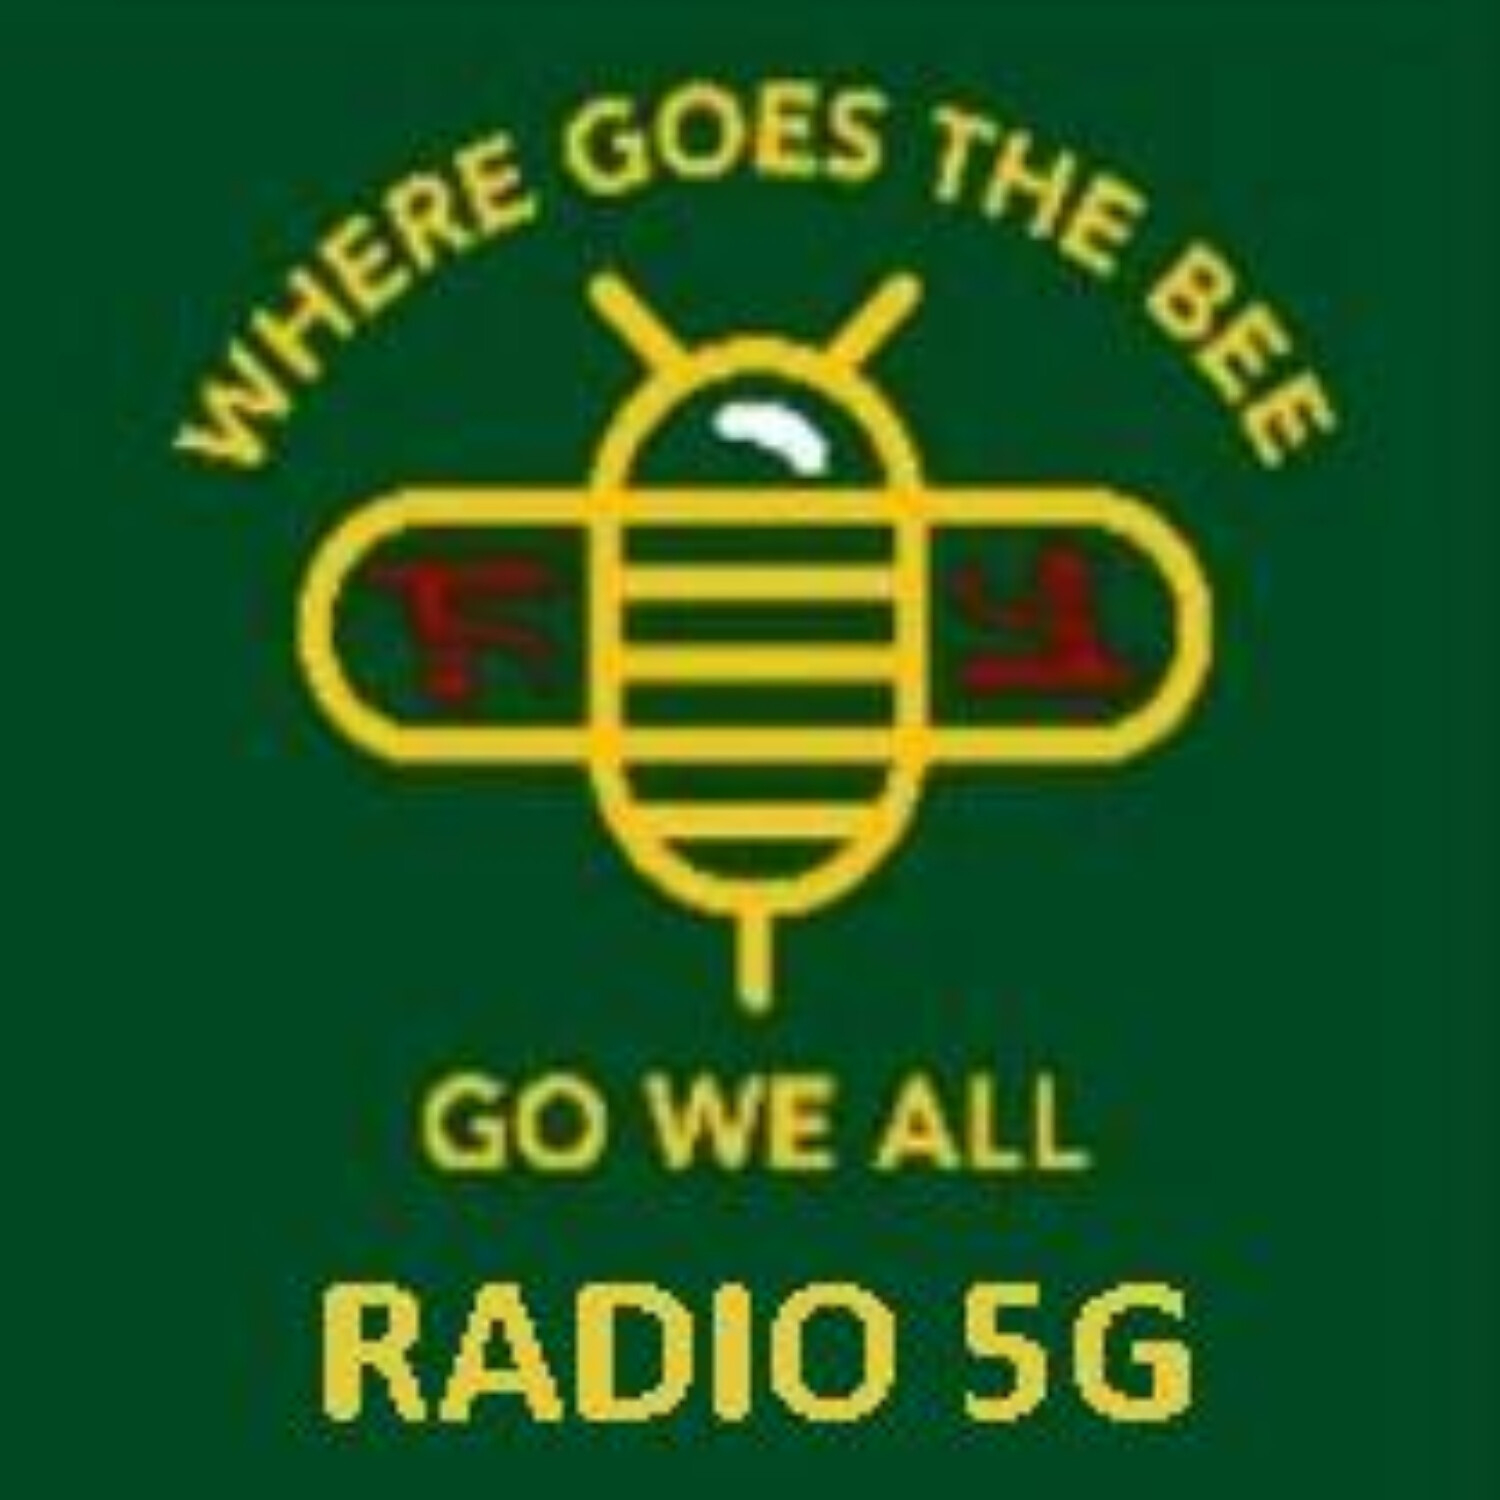 RADIO 5G 11/30/22 - Mike Adams & Dr. Group from Parasites to C60